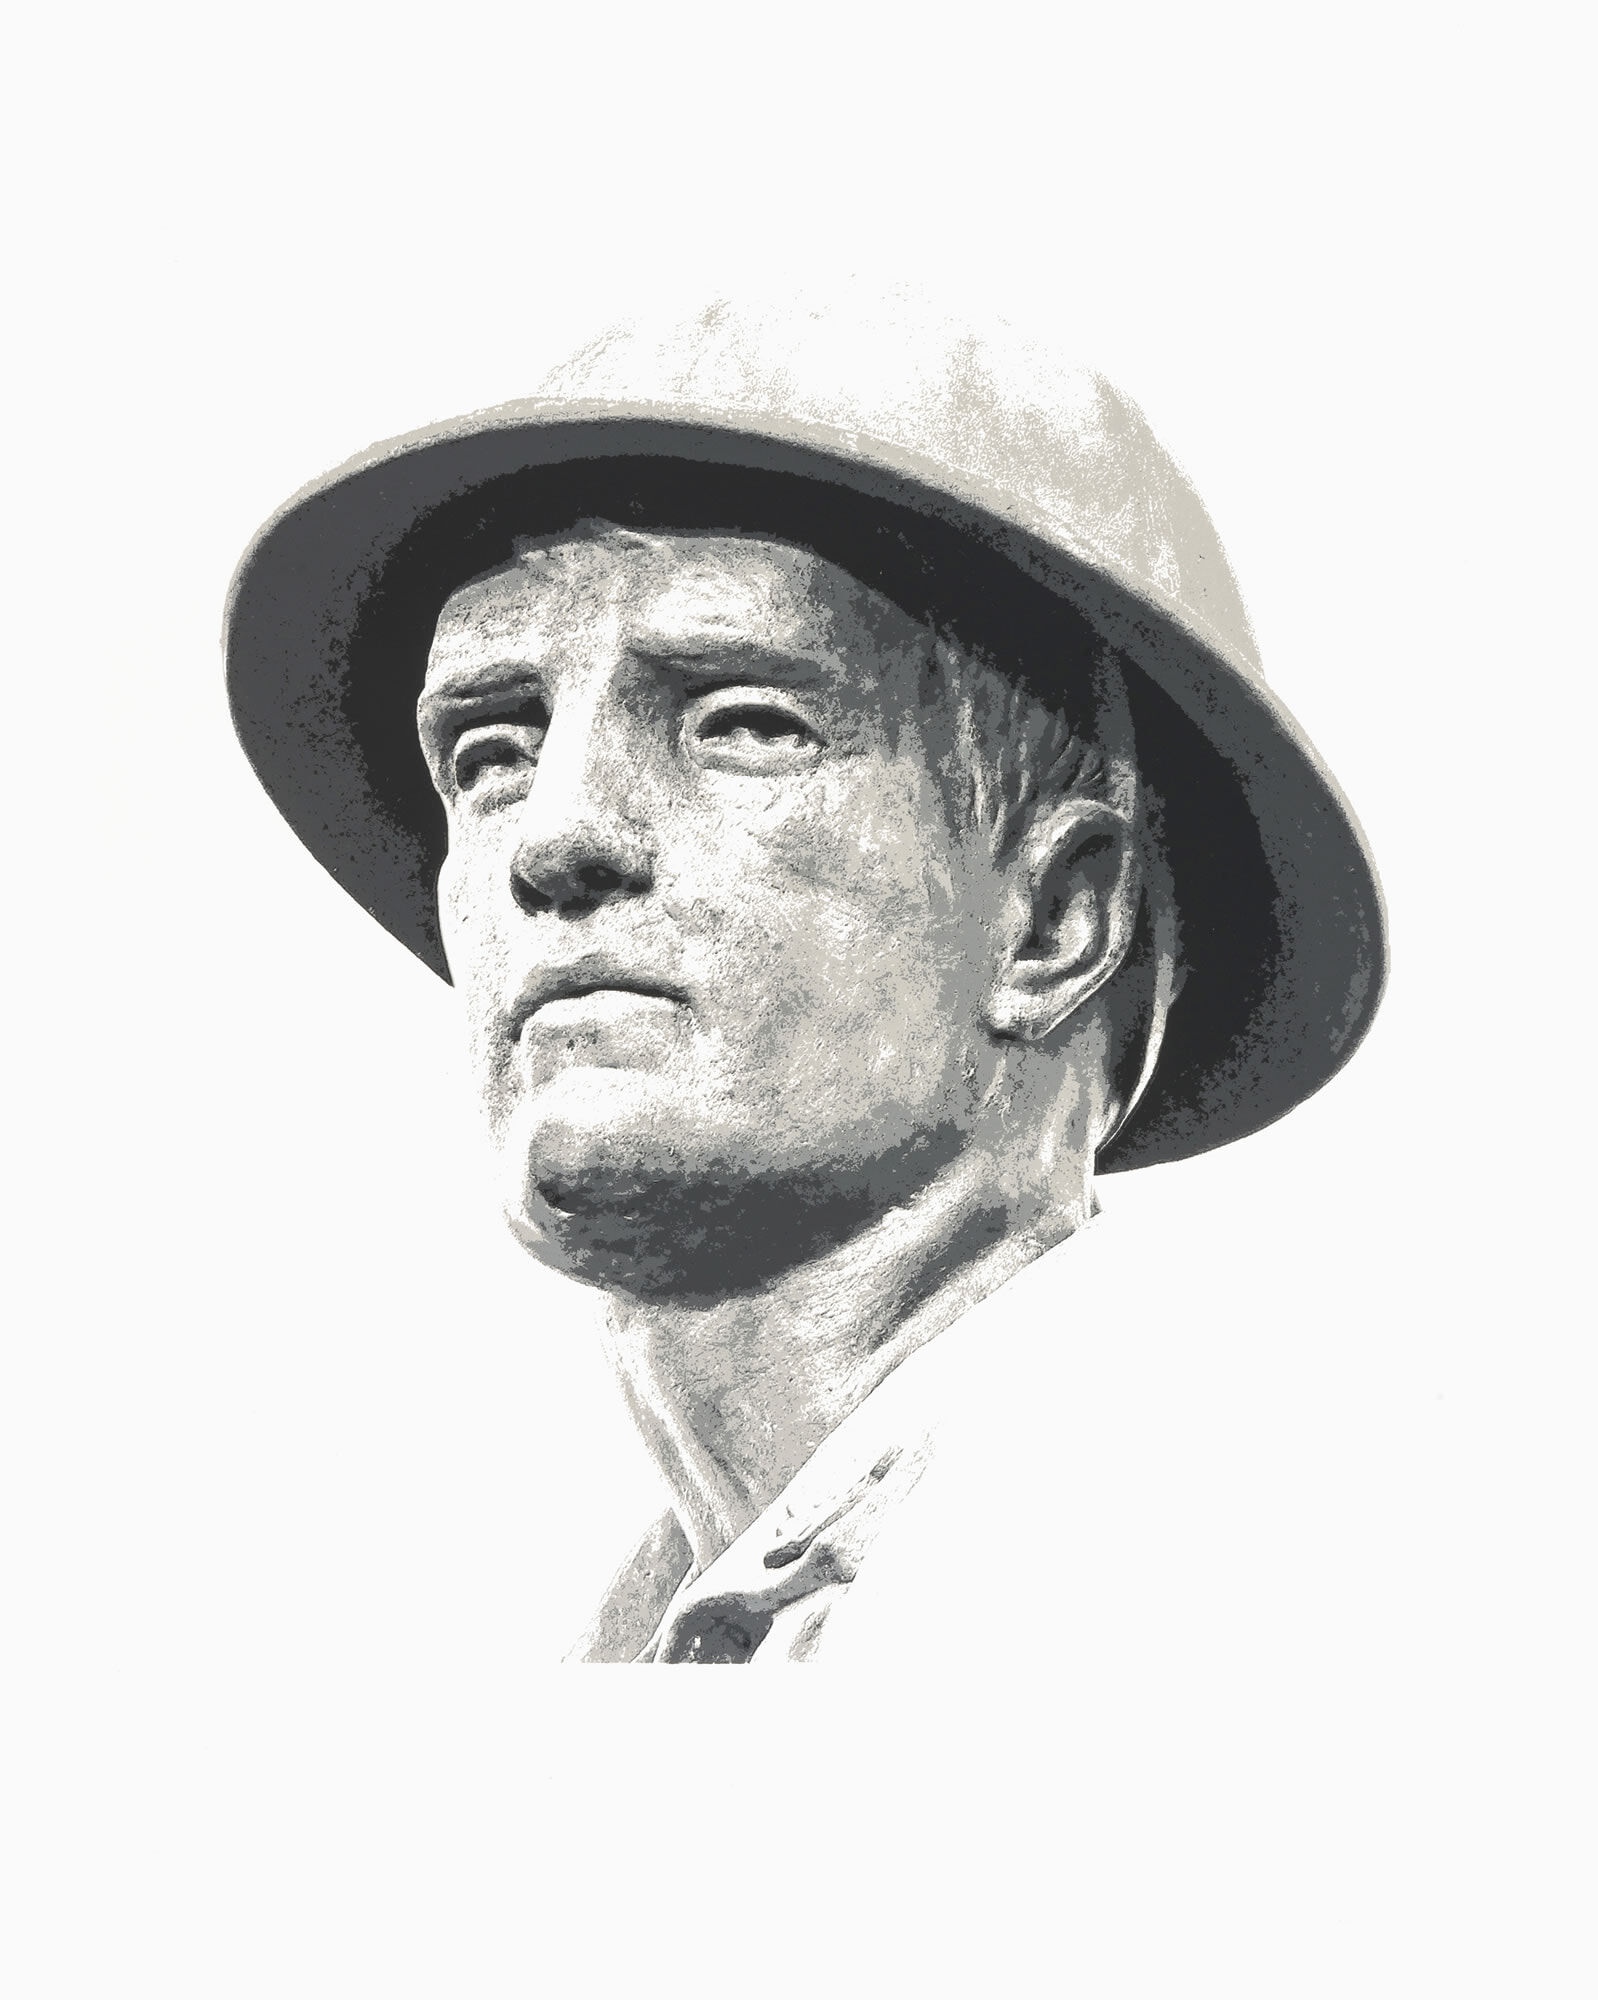 One of Clayton Tremlett's artworks from his 'Immortals' series of prints, an image of the head of the Maryborough War Memorial statue